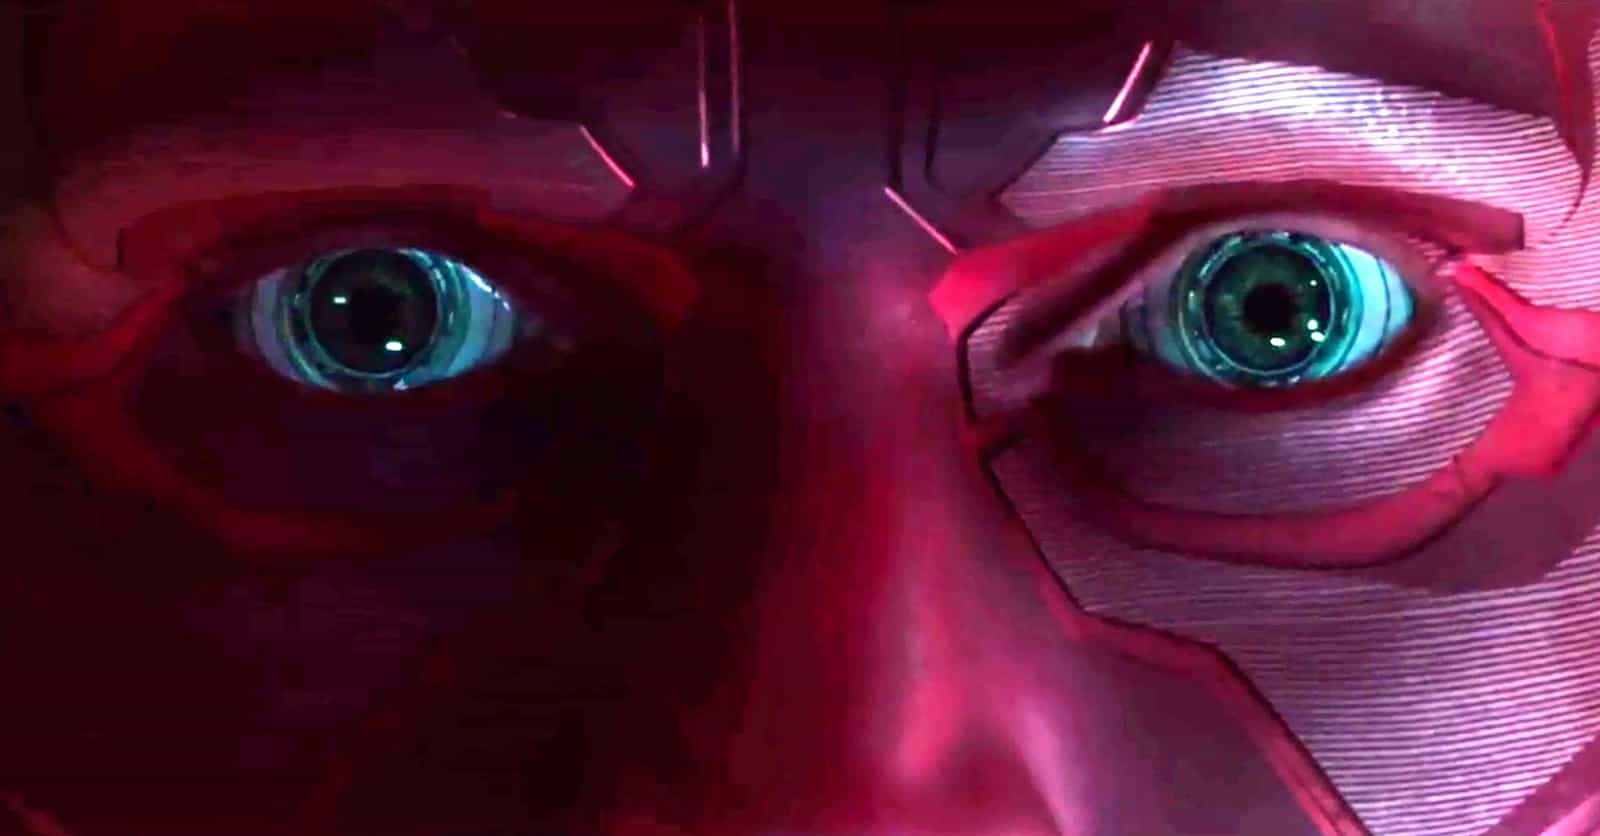 Small Details About Vision That MCU Fans Noticed